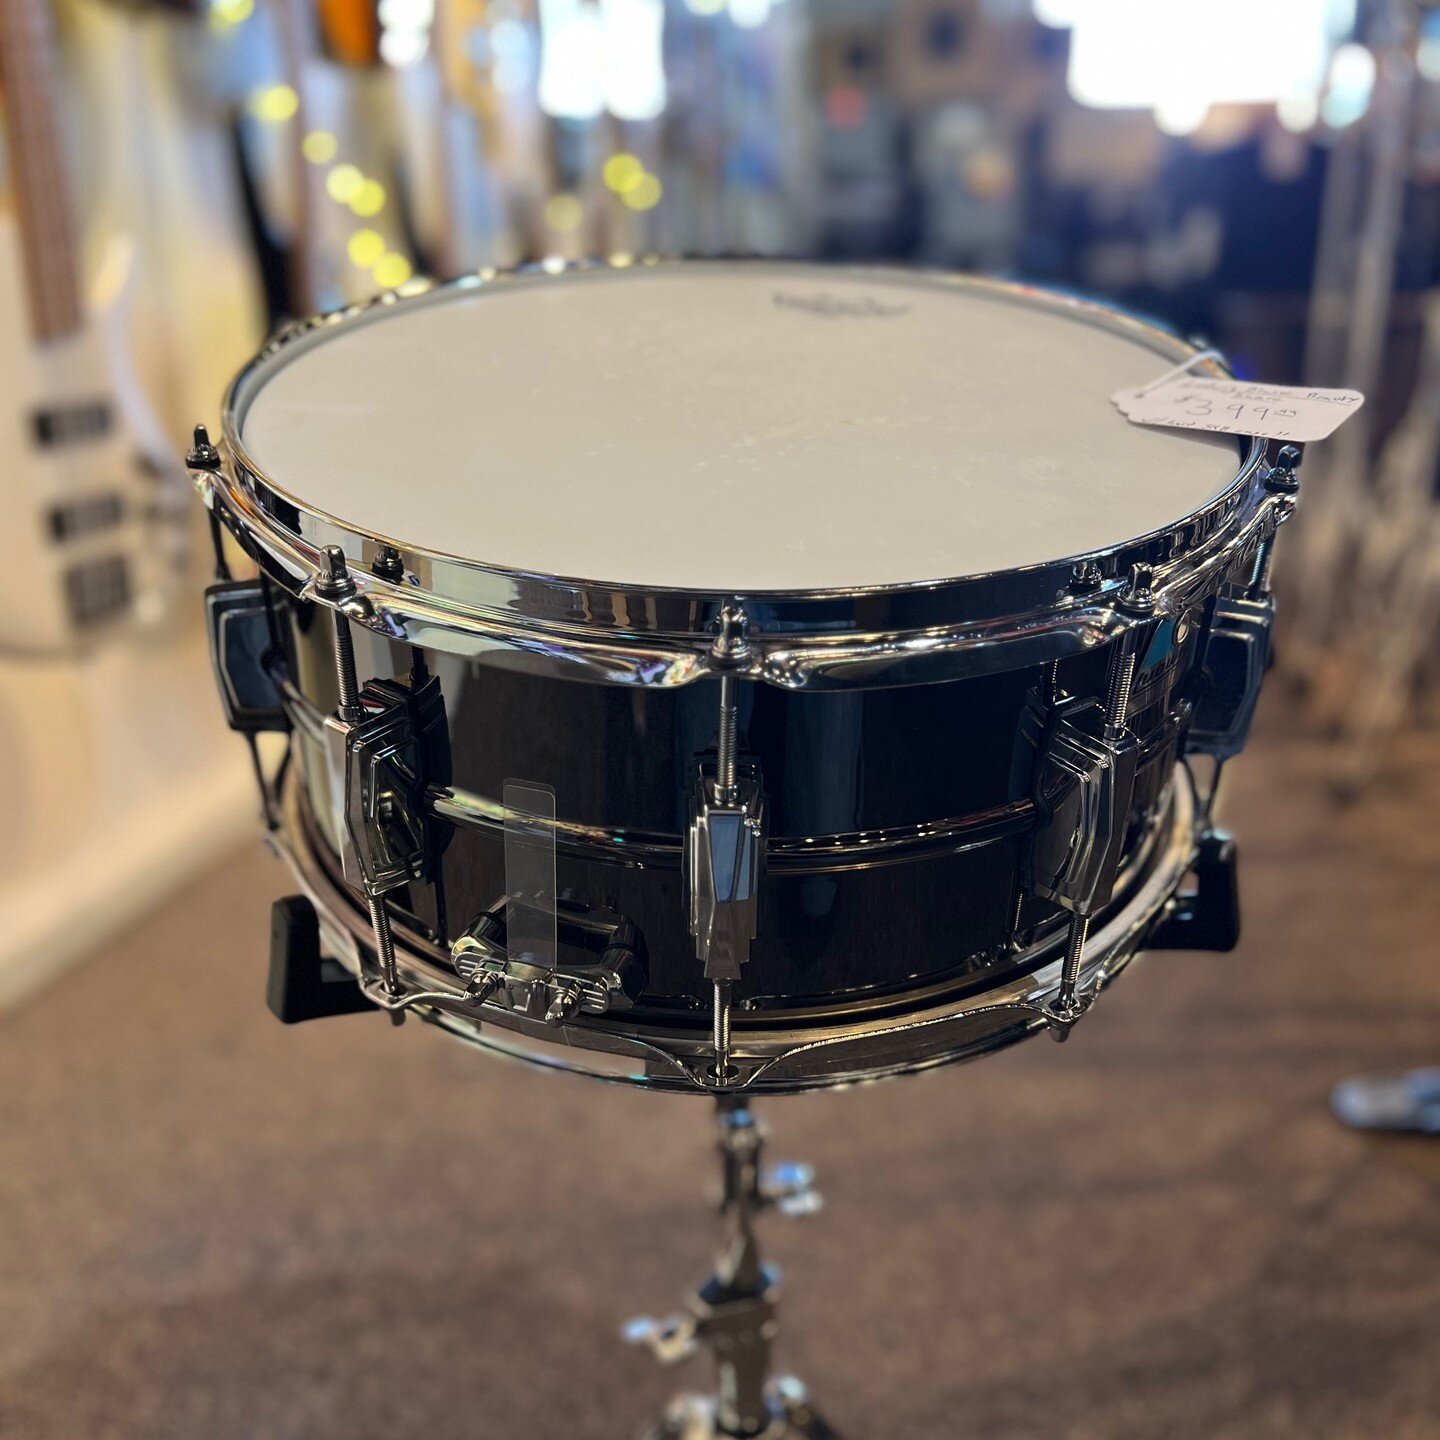 It's difficult to get a picture on these snares, but the guys that want it, know what it looks like. 
Ludwig Black Beauty with SKB hard case. 14 X 6.5
A bargain at $400
One of the most popular and desired snare drums in the world. Junp on this fast.